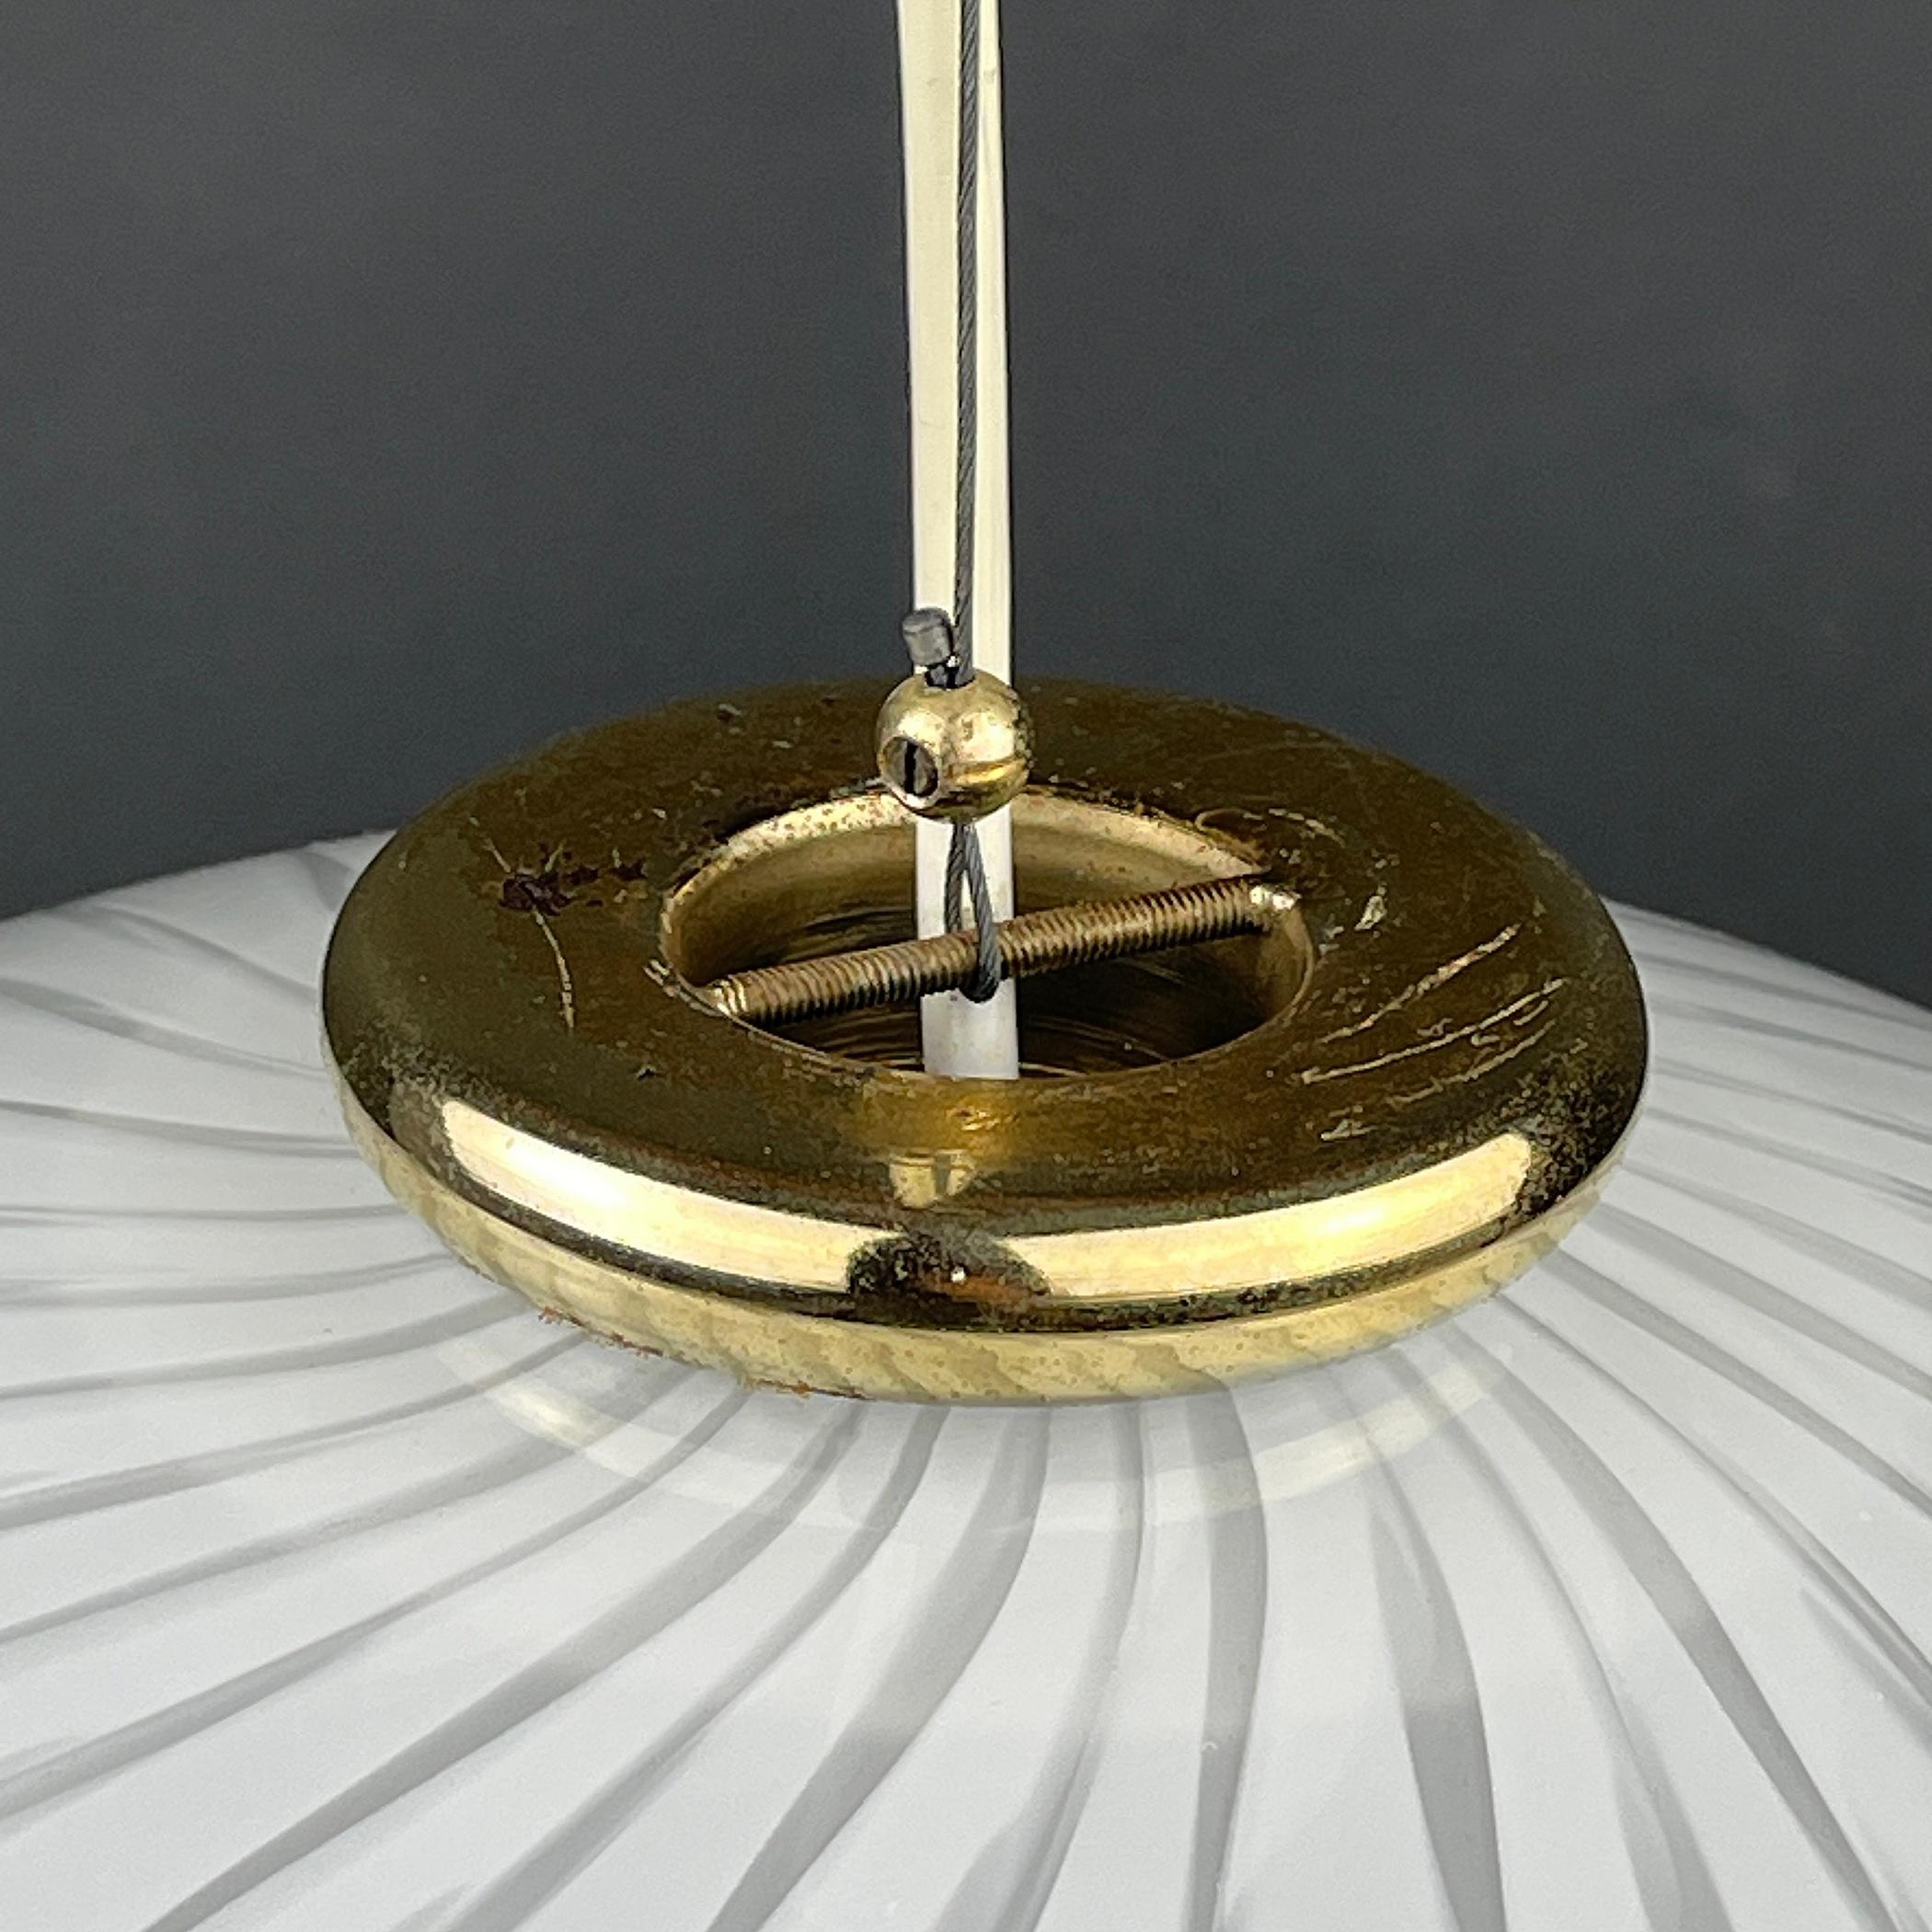 Vintage Swirl Murano Glass Pendant Lamp, Italy, 1970s For Sale 1